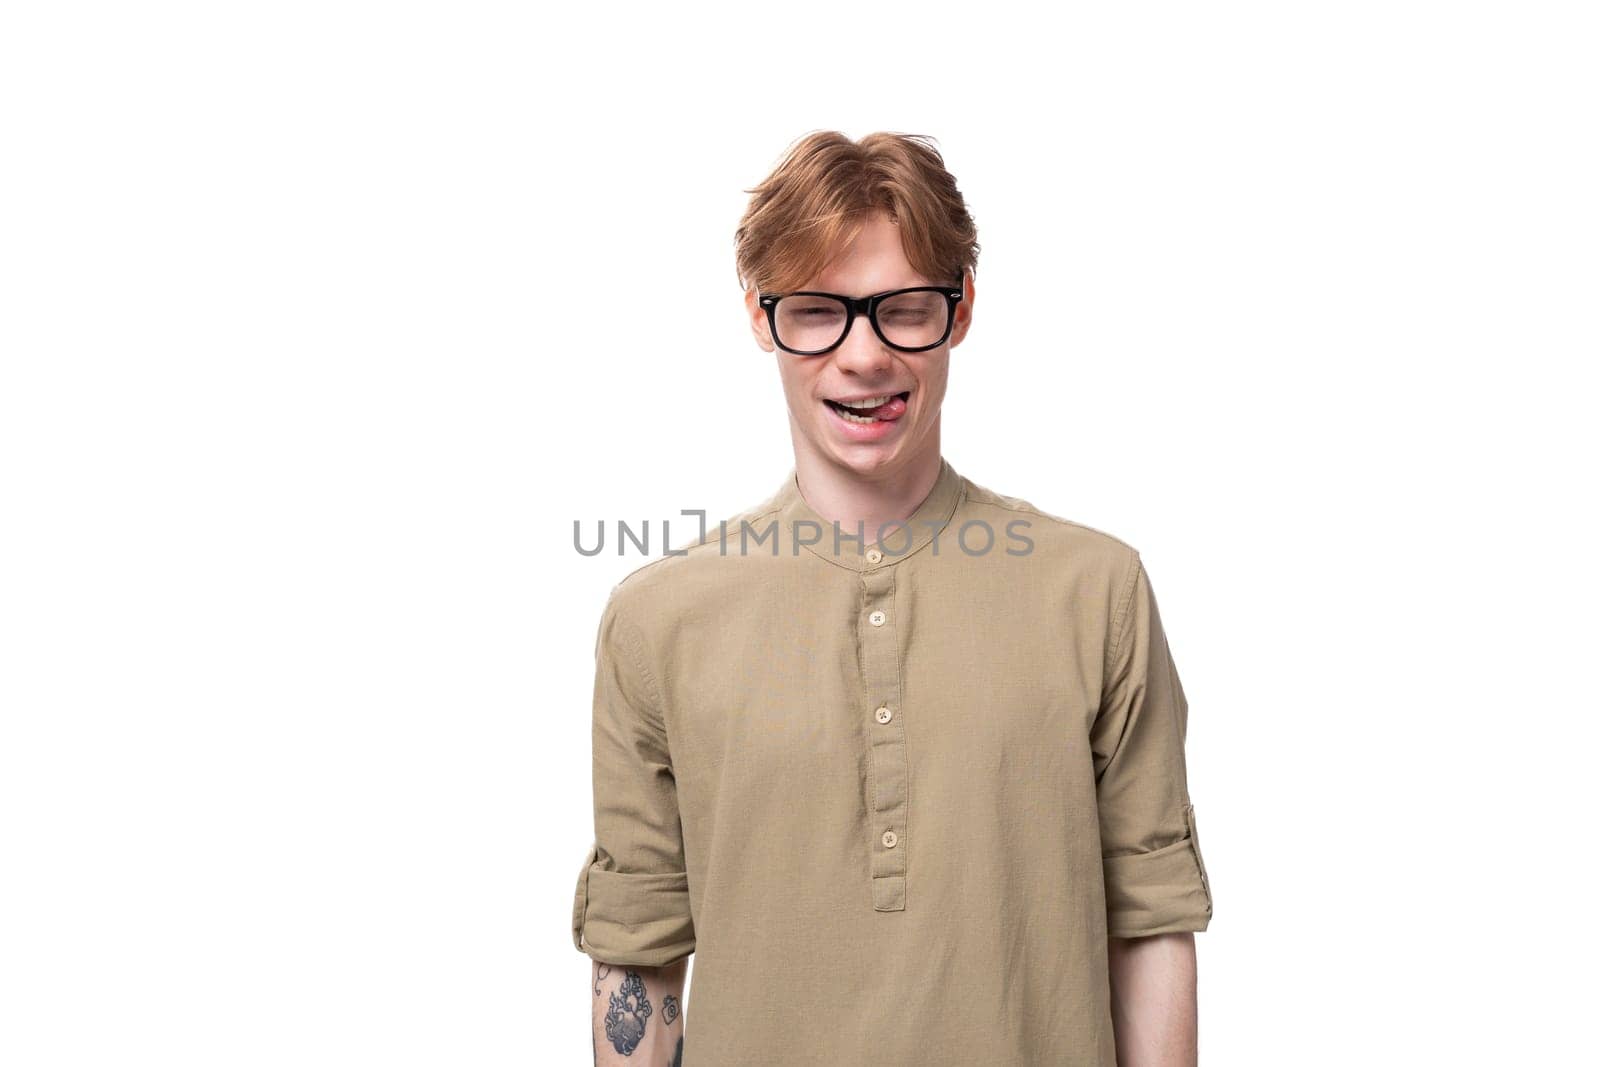 close-up portrait of a stylish european guy with red hair dressed in a fashionable brown shirt and trousers on a white background. people lifestyle concept.